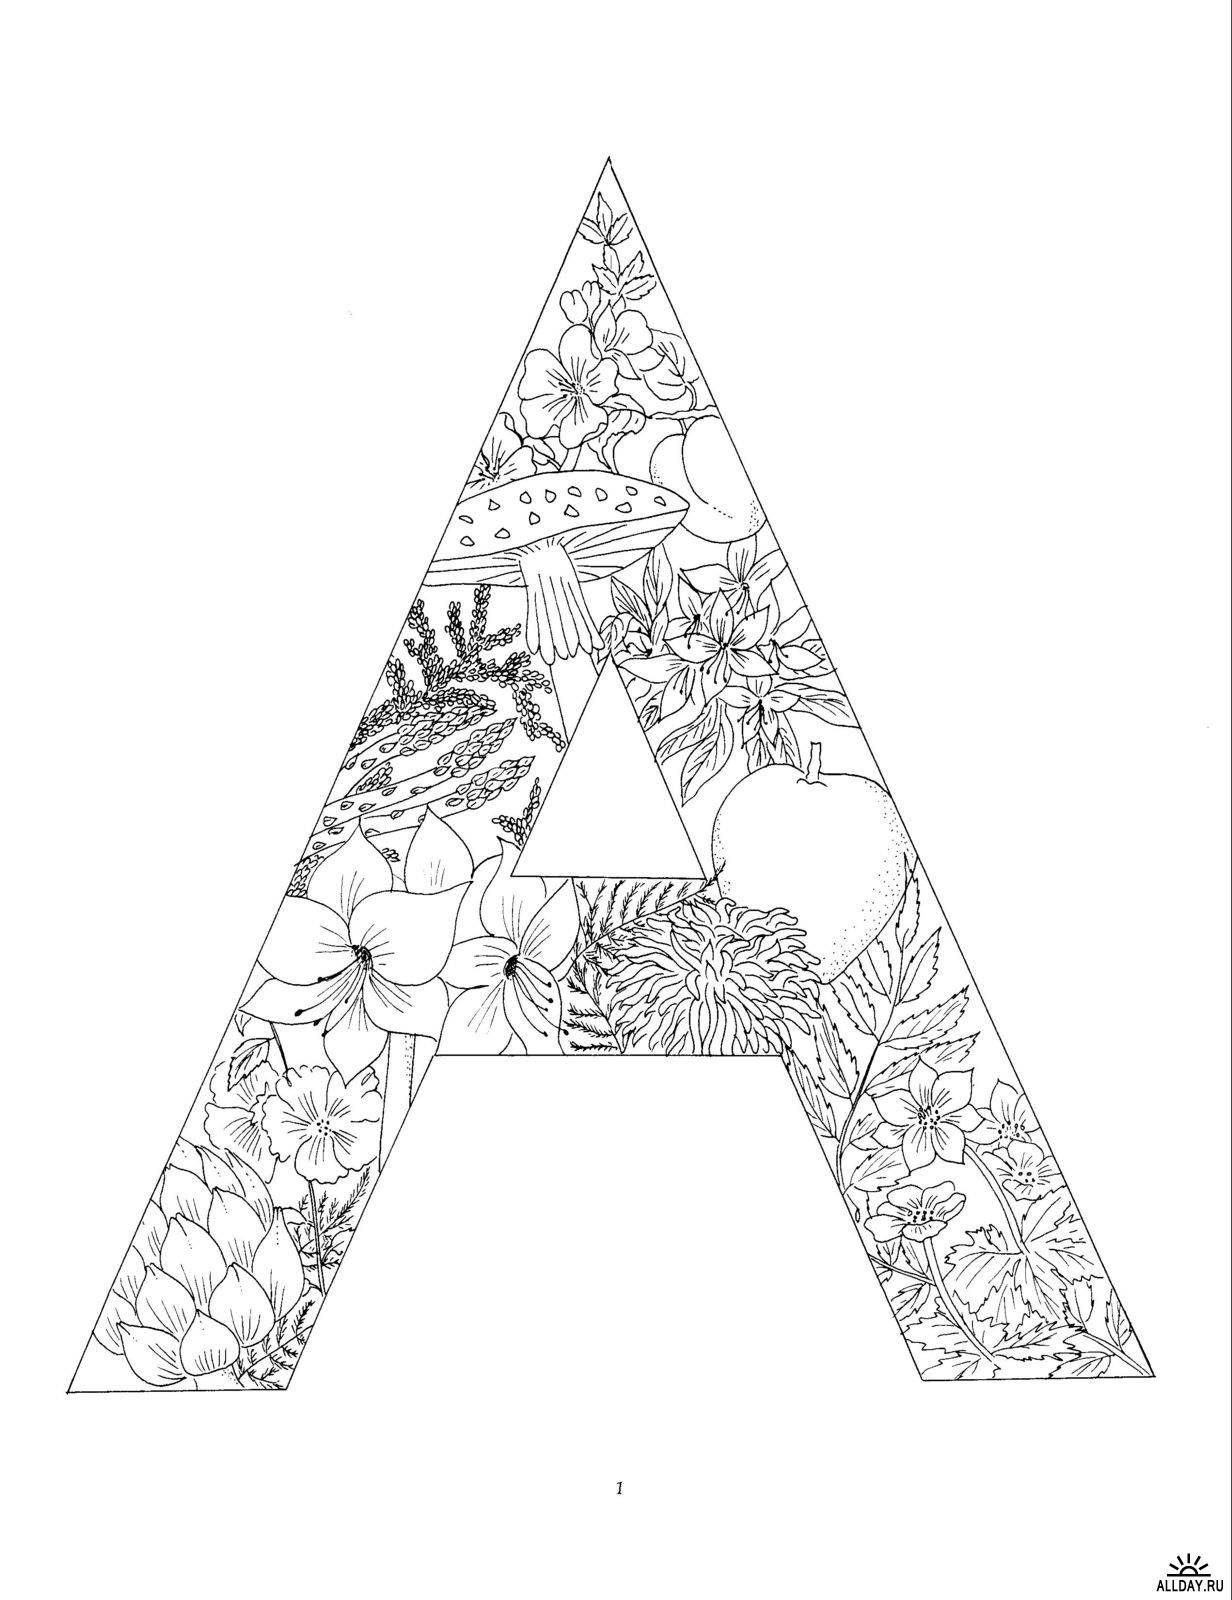 Coloring Pages : Coloring For Adults Letter Nice Intricate ...